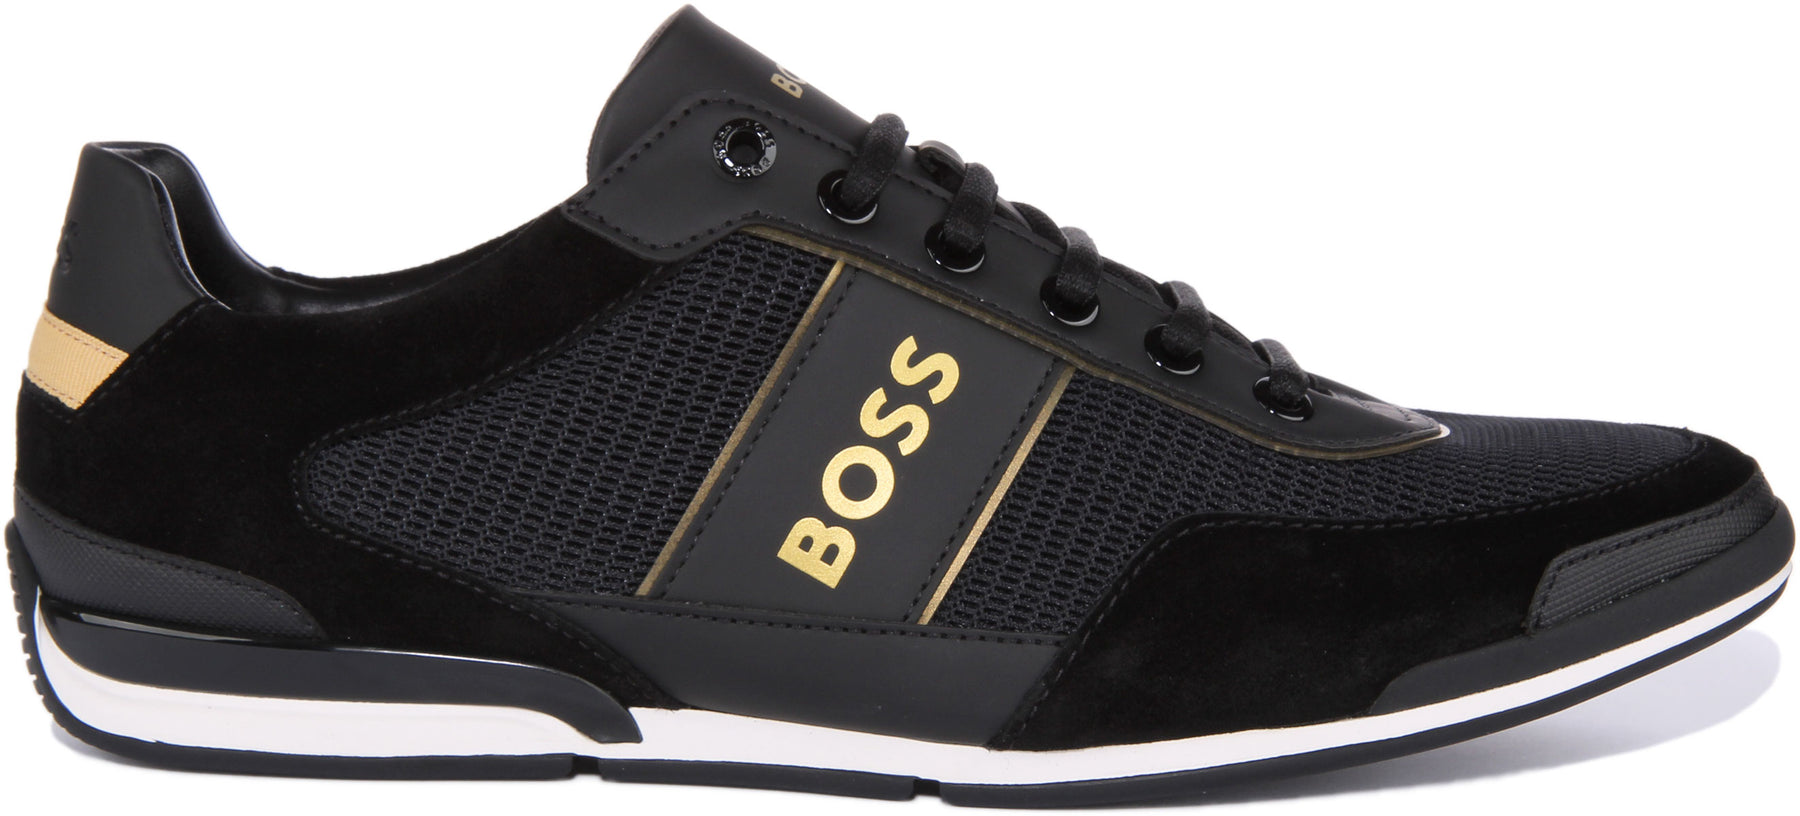 Boss Saturn Lowp Pulg In Black Gold Mens Low Profile Leather Trainer 4feetshoes 